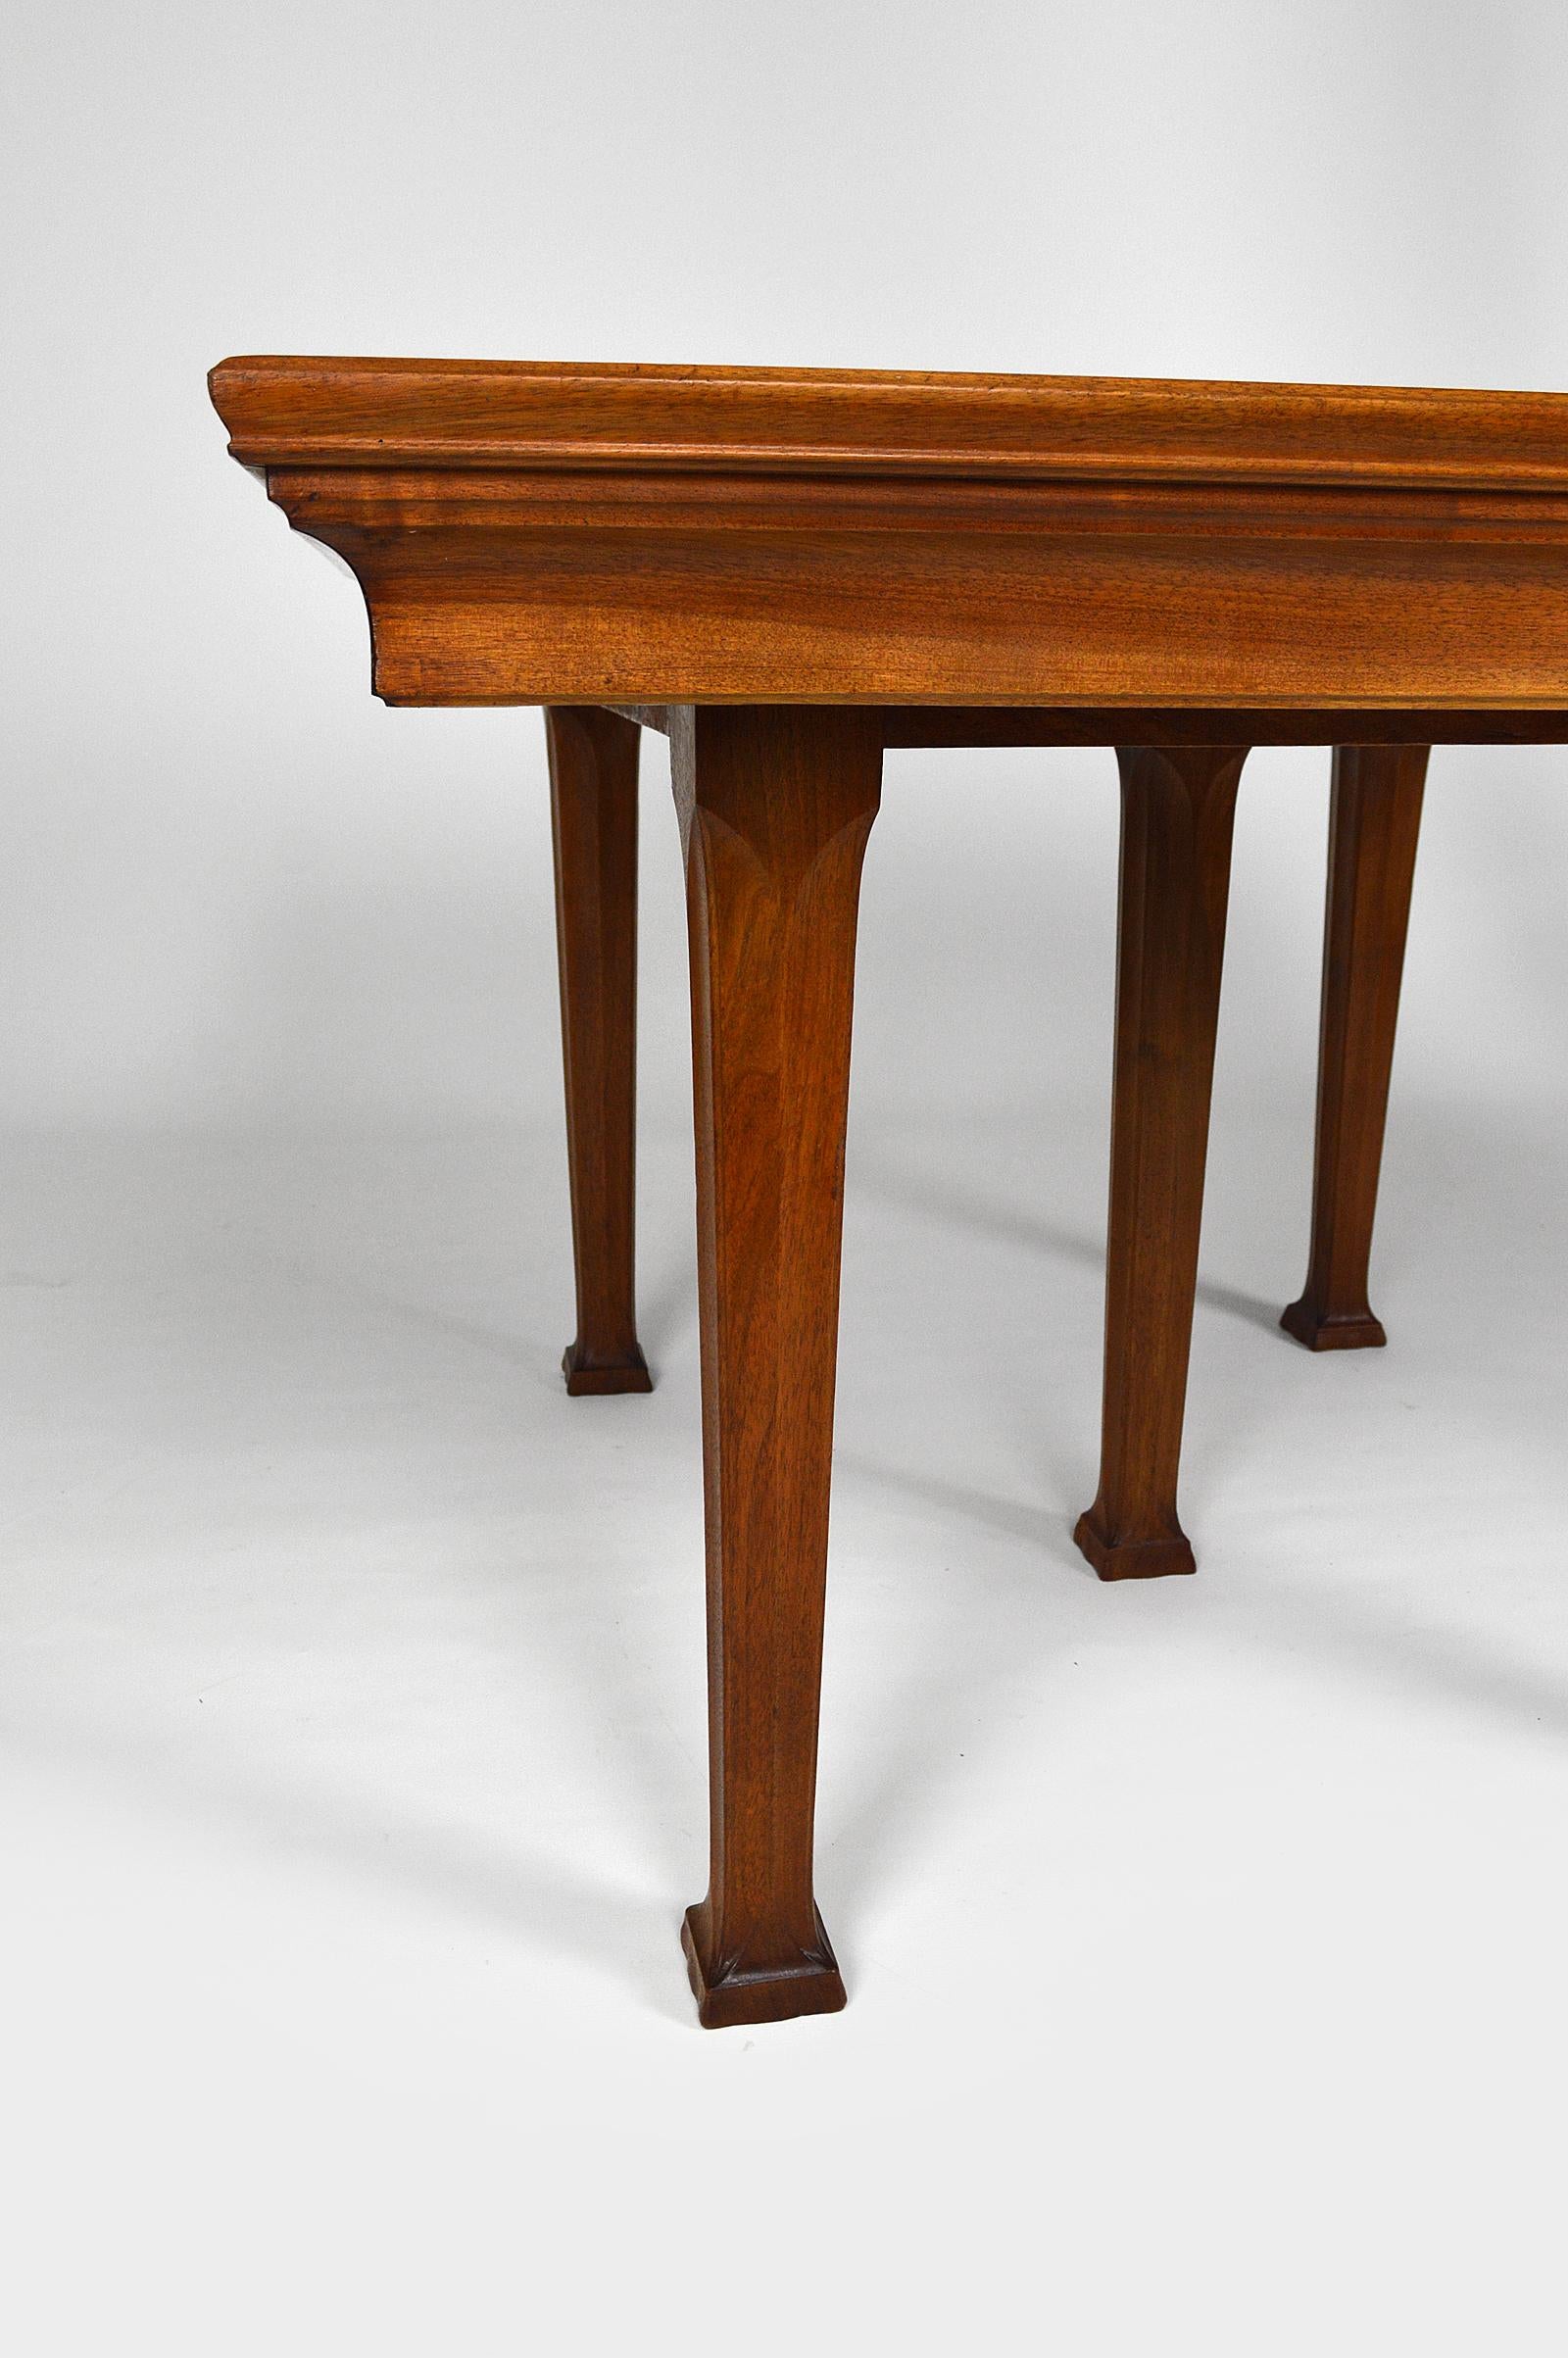 Early 20th Century Art Nouveau Carved Walnut Dining Table, circa 1905, Attributed to Georges Nowak For Sale